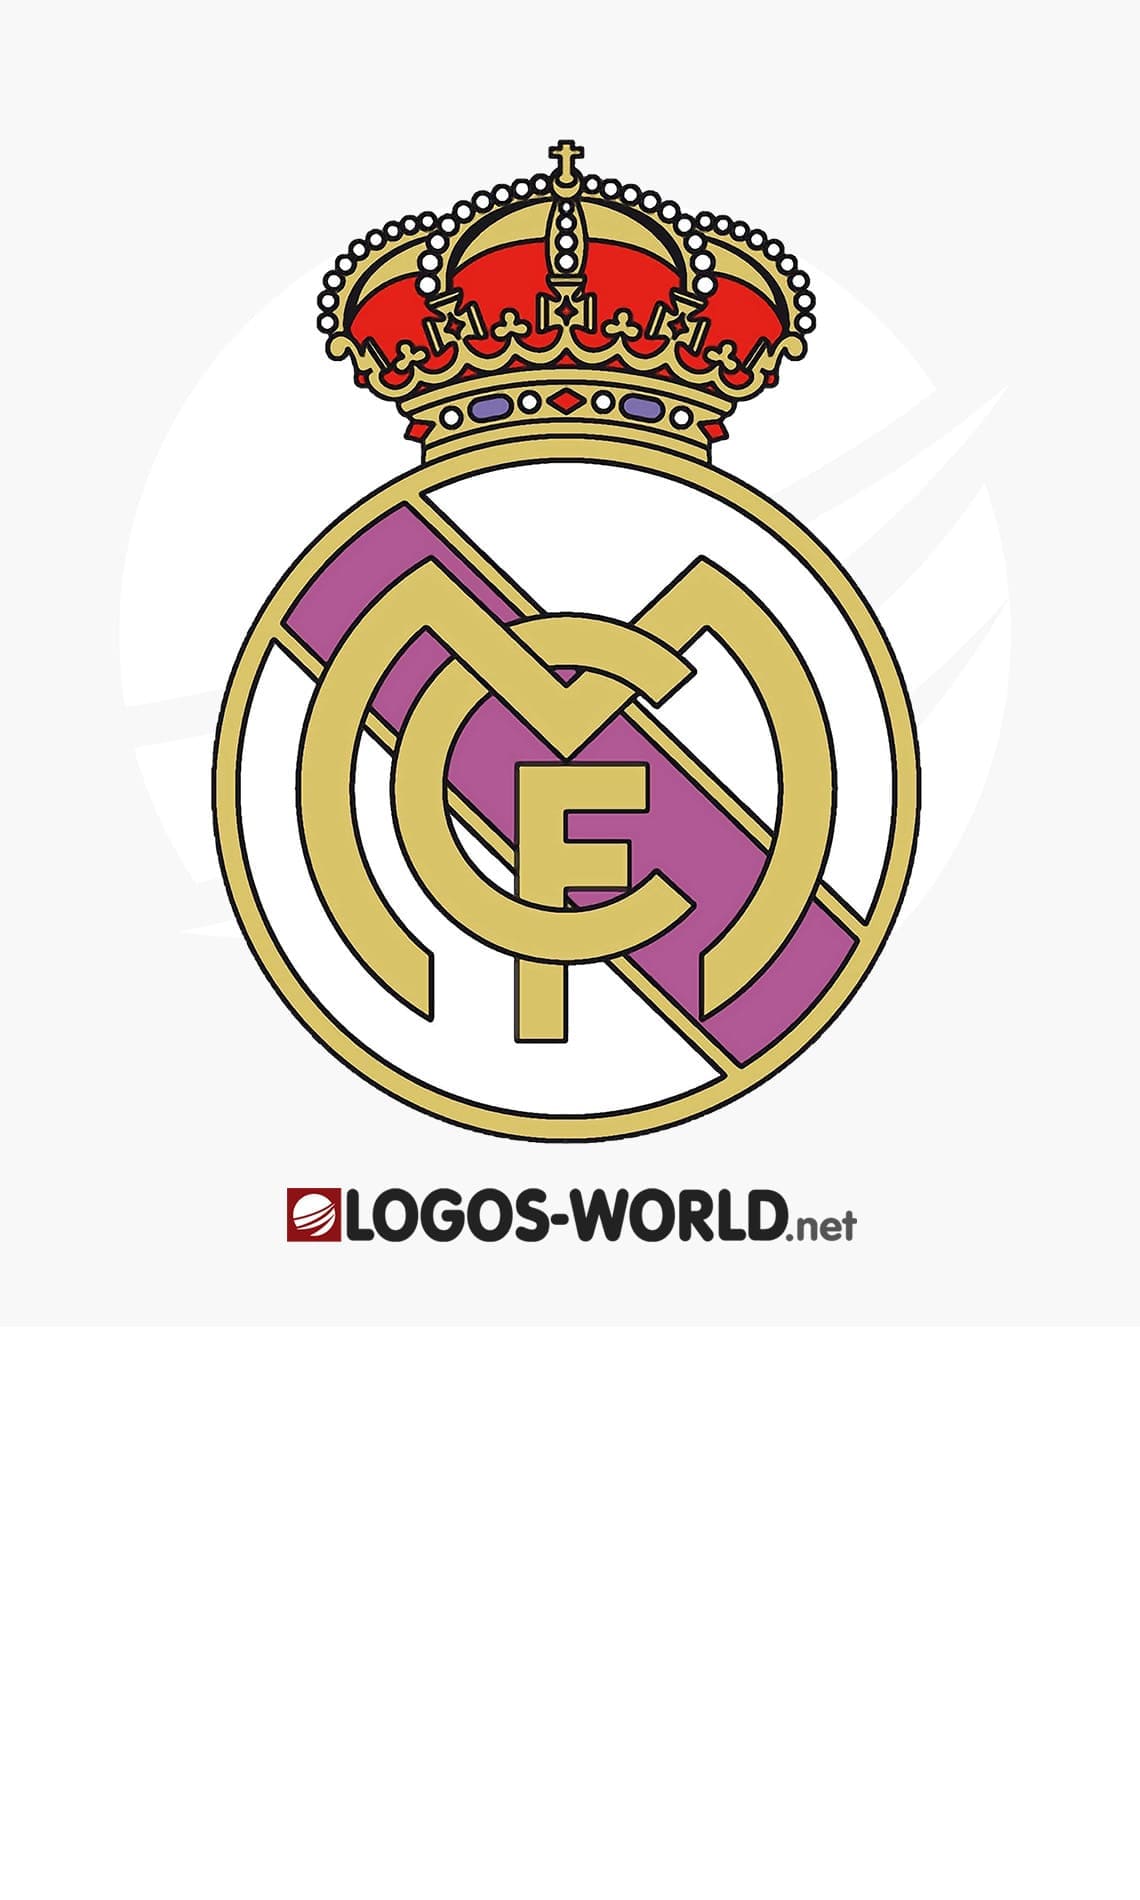 Real Madrid Logo The Most Famous Brands And Company Logos In The World